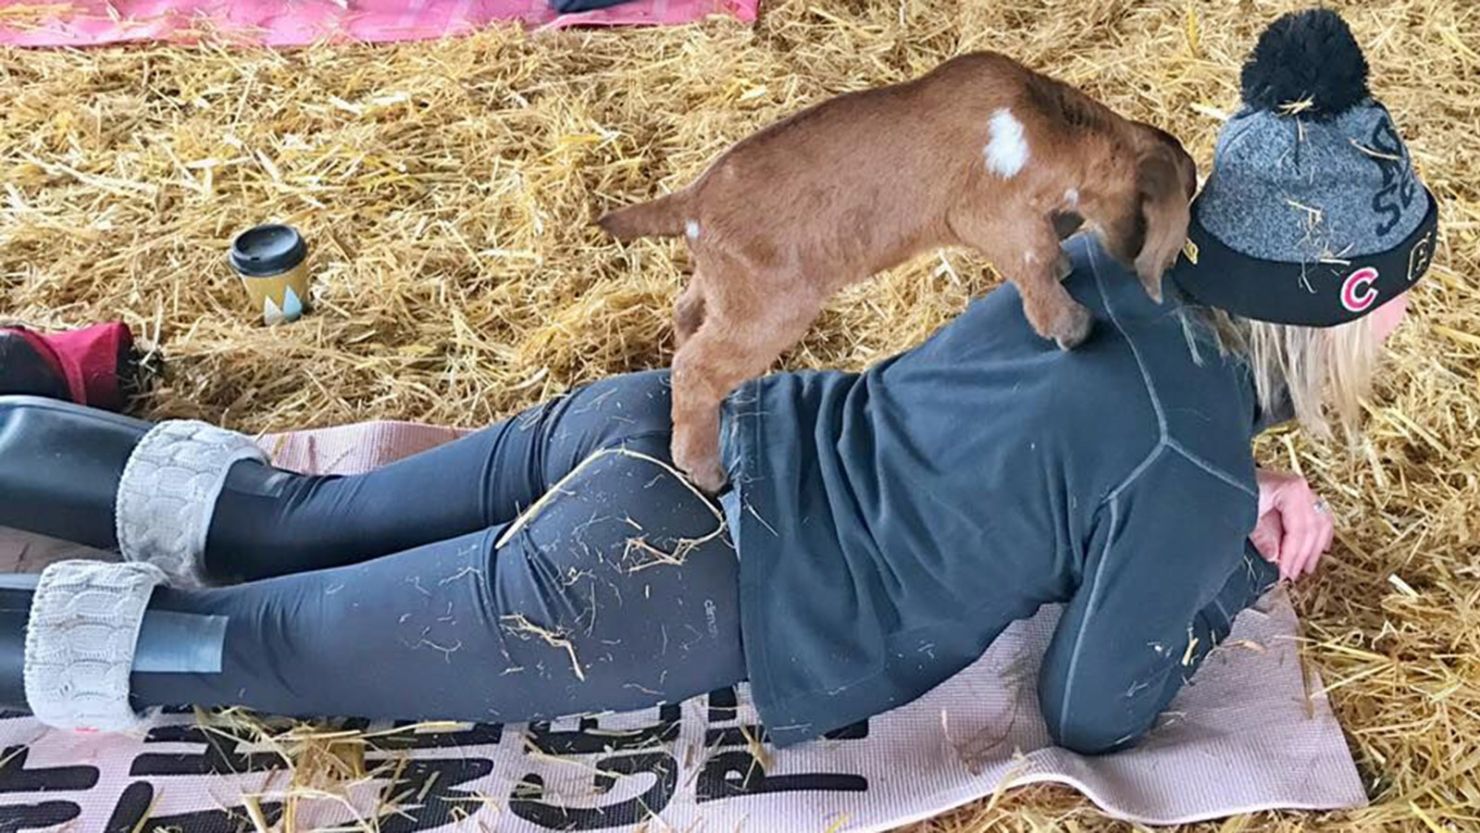 Goat yoga' is a thing - and hundreds are lining up for it